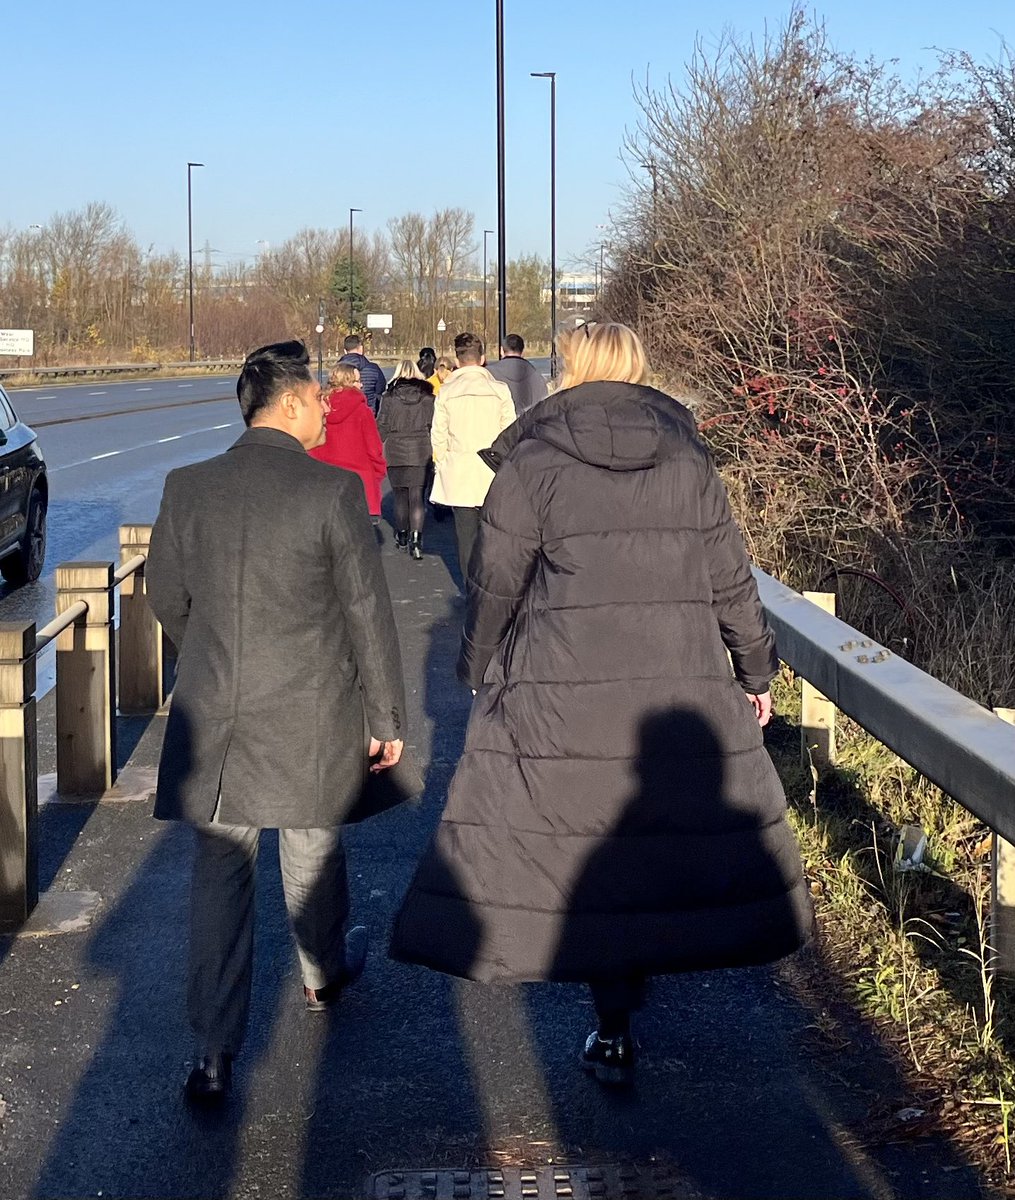 Our @bwcet ‘Well-Being’ lunchtime walk at Barmston.. notwithstanding 2 ‘trips’ and a near miss with a branch! We survived and it was lovely in the winter sun! #team #Wellbeing #MentalHealthMatters